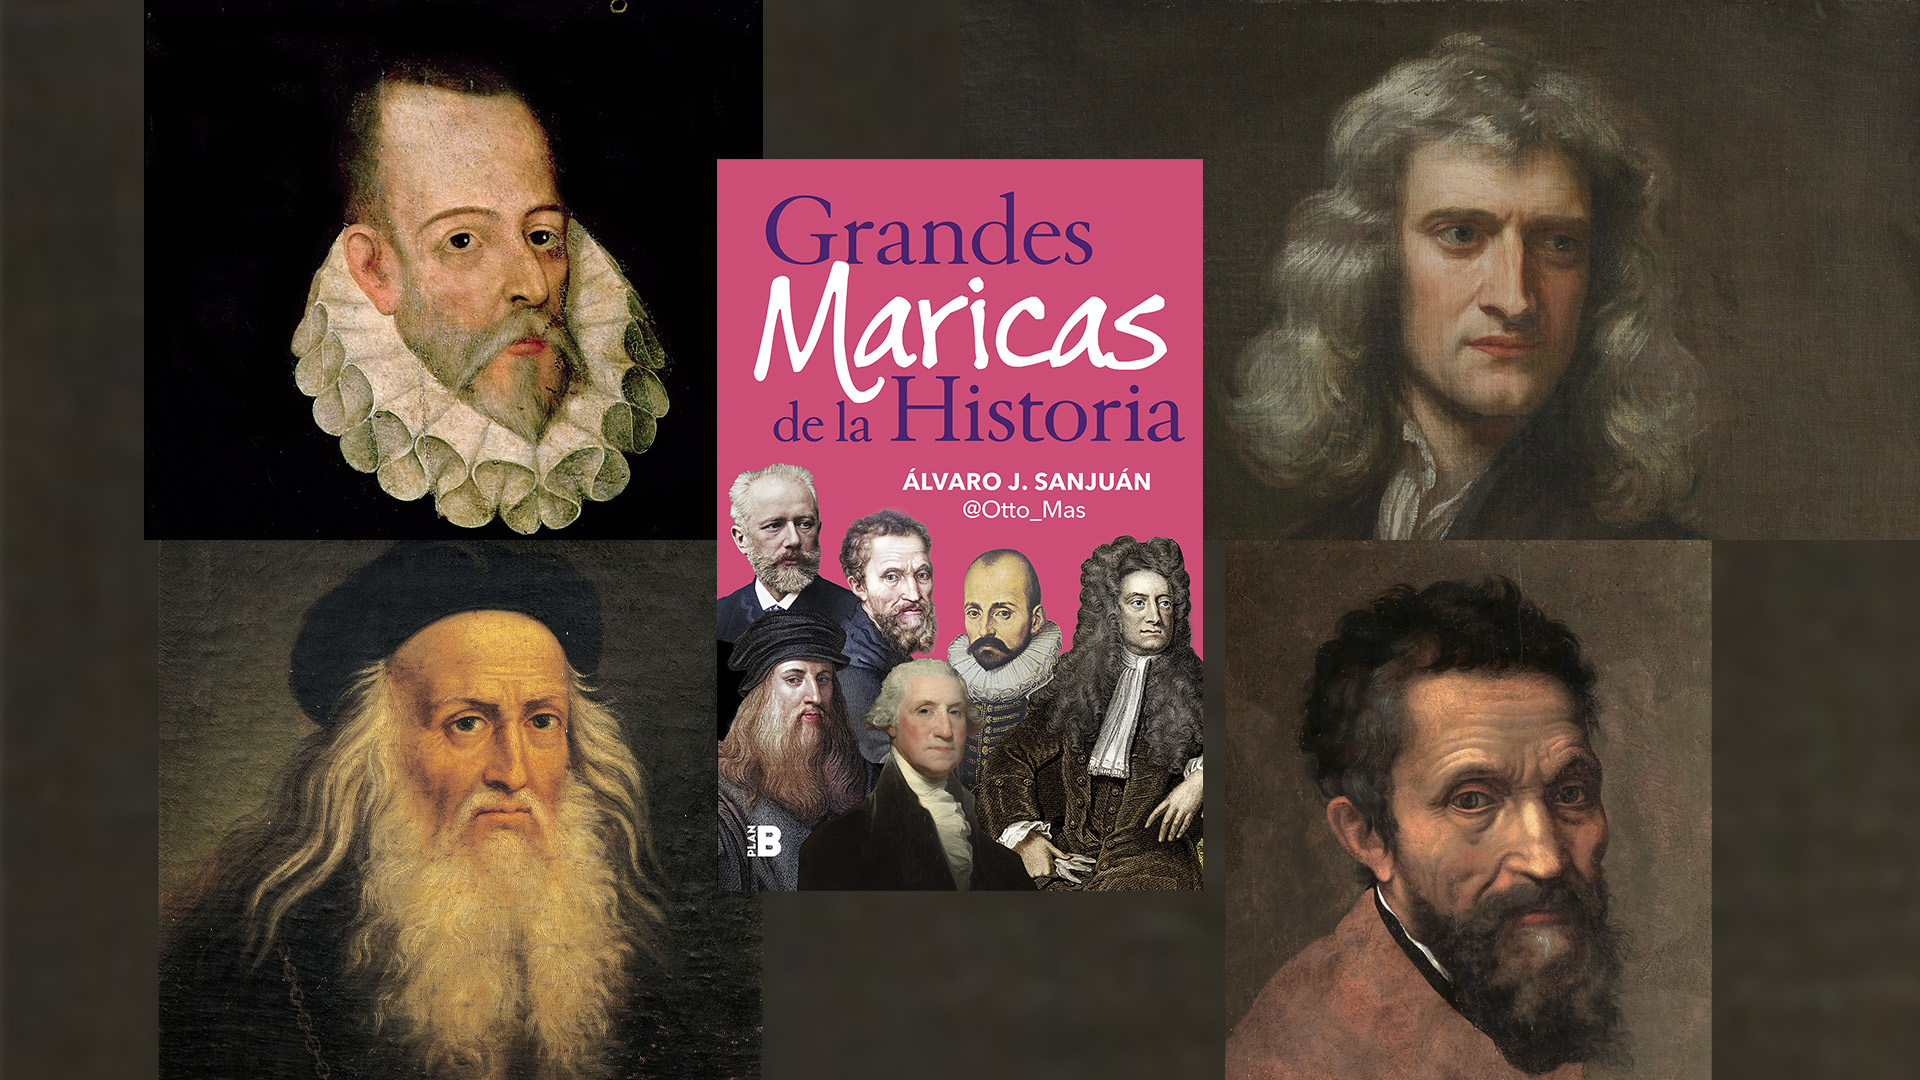 The official story has not revealed the true sexuality of various prominent men from the world of art, science and politics such as Isaac Newton, Michelangelo or Leonardo Da Vinci.  The book "Great gays of history" finally manages to get her out of the closet.